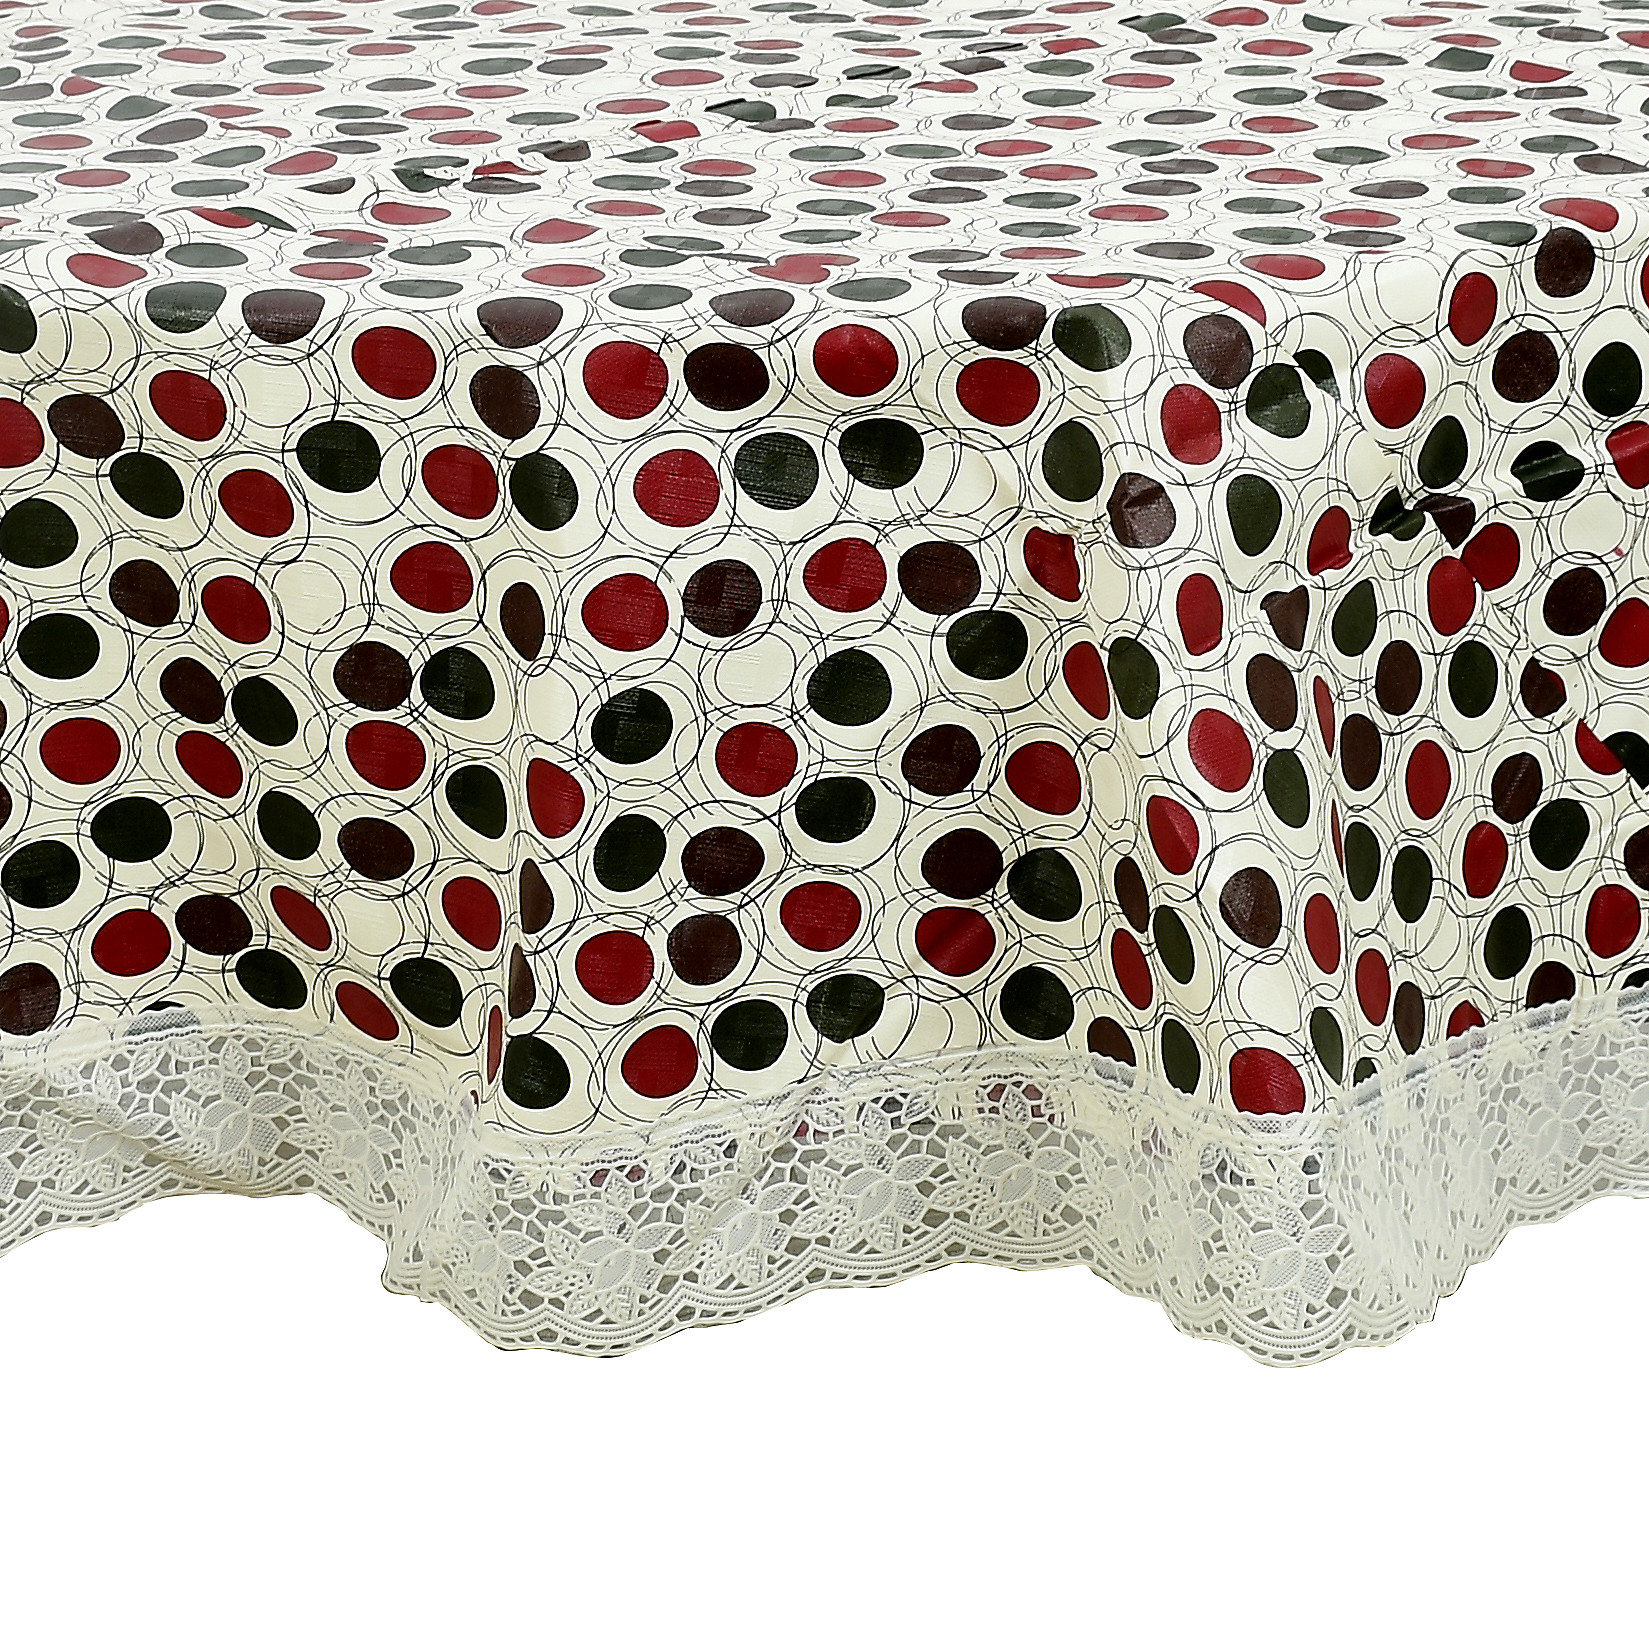 Kuber Industries Polka Dots Print Round Table Cover 72 Inch-Waterproof PVC Resistant Spillproof PVC Fabric Table Cover for Dining Room Kitchen Party (Brown)-KUBMRT11823